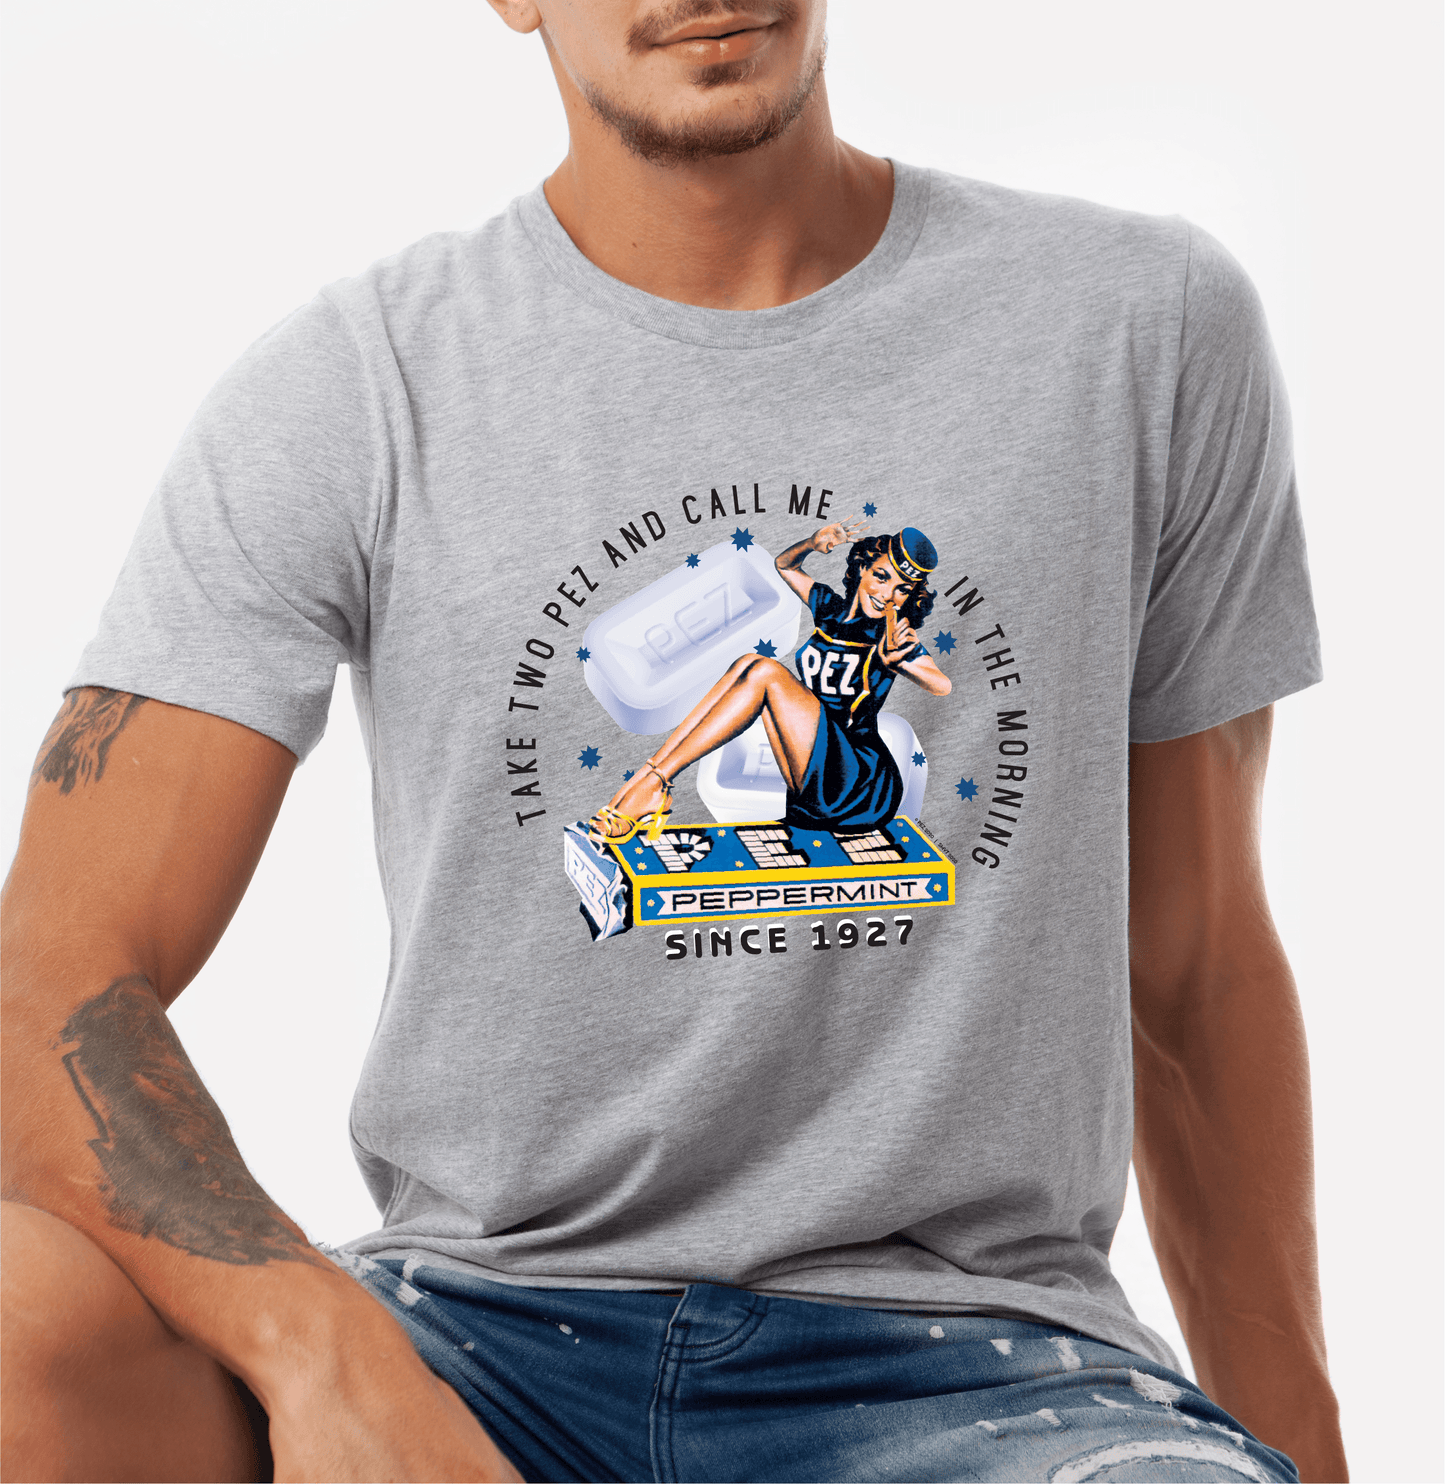 PEZ Vintage Pin Up Girl | Take Two PEZ and Call Me in the Morning Tee